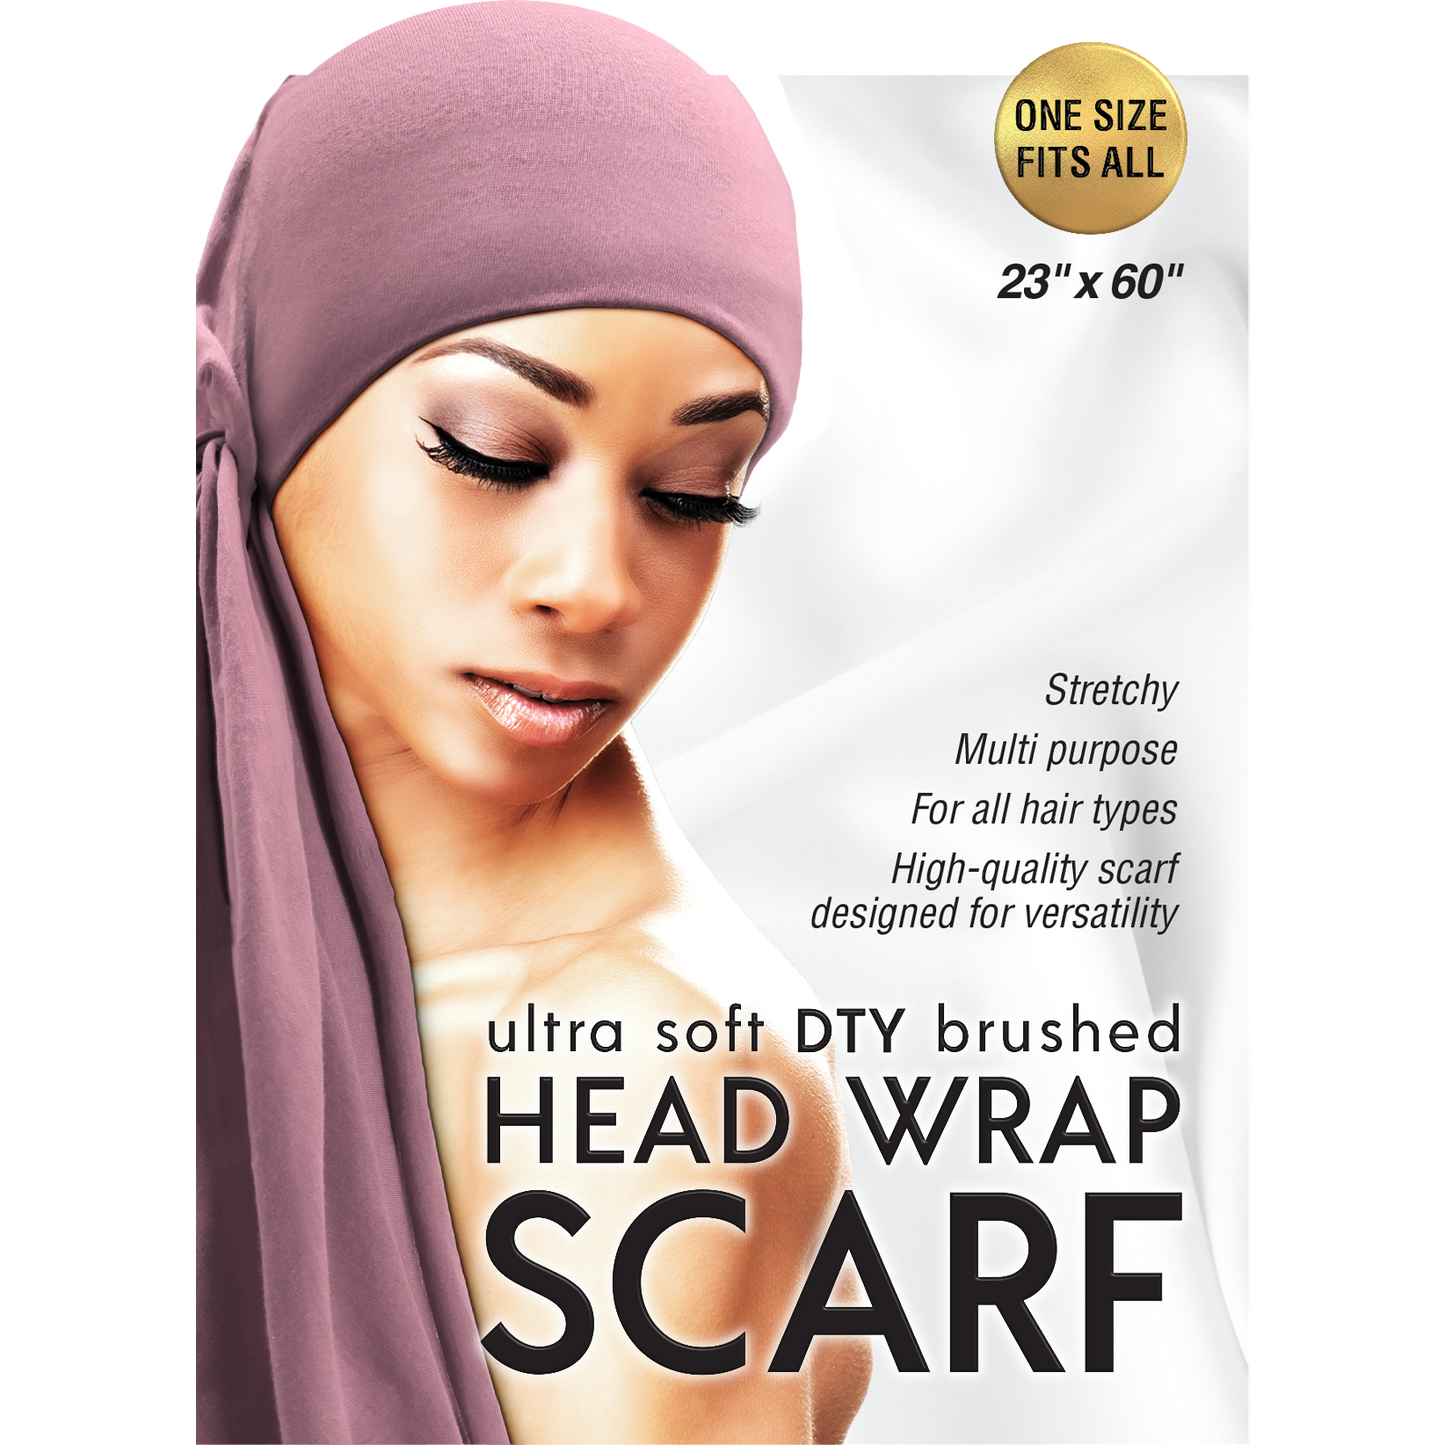 ULTRA SOFT DTY BRUSHED HEAD WRAP SCARF